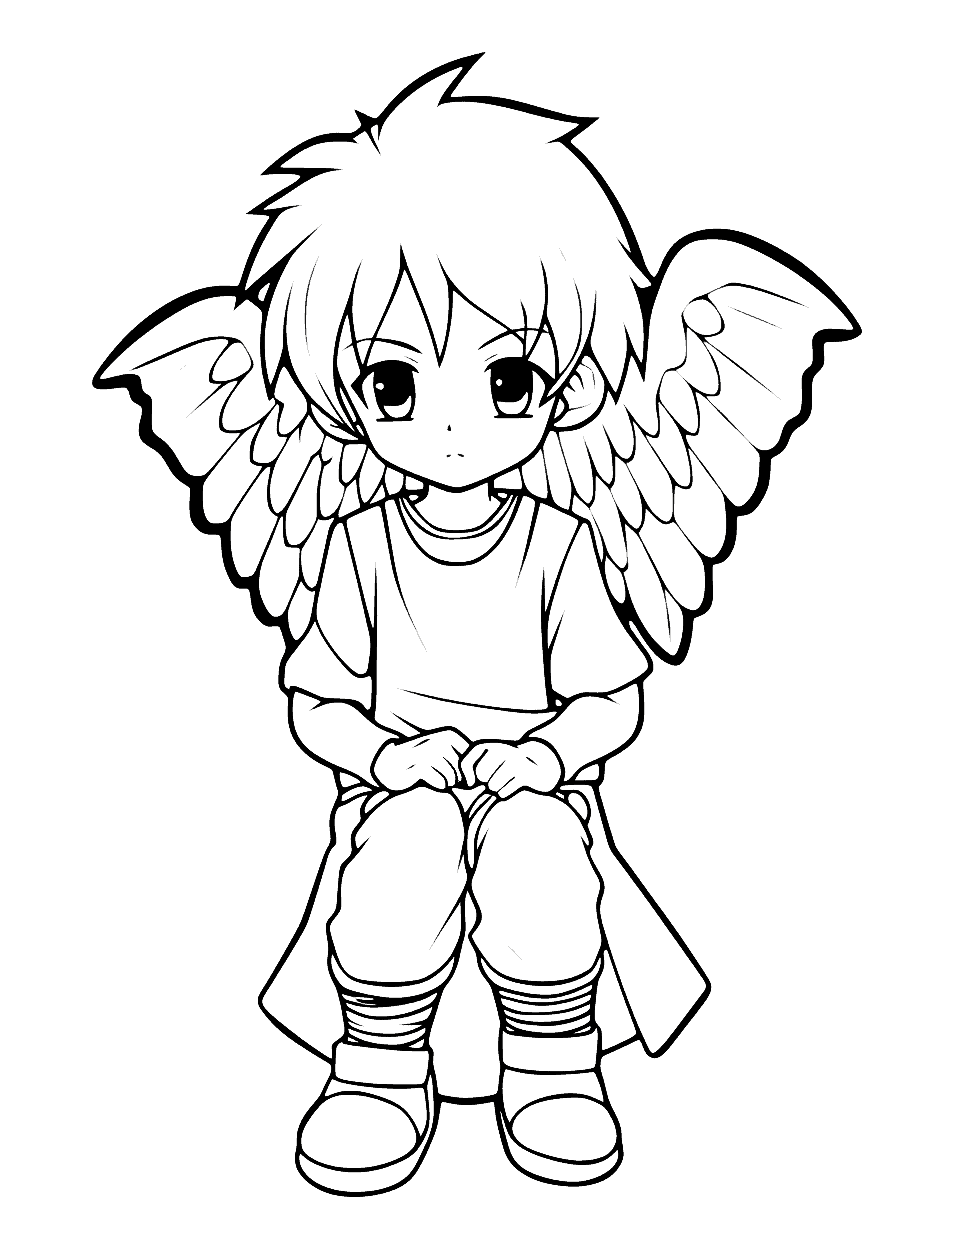 Sad Anime Angel Coloring Page - A sad anime angel sitting on a cloud, expressing deep emotions.